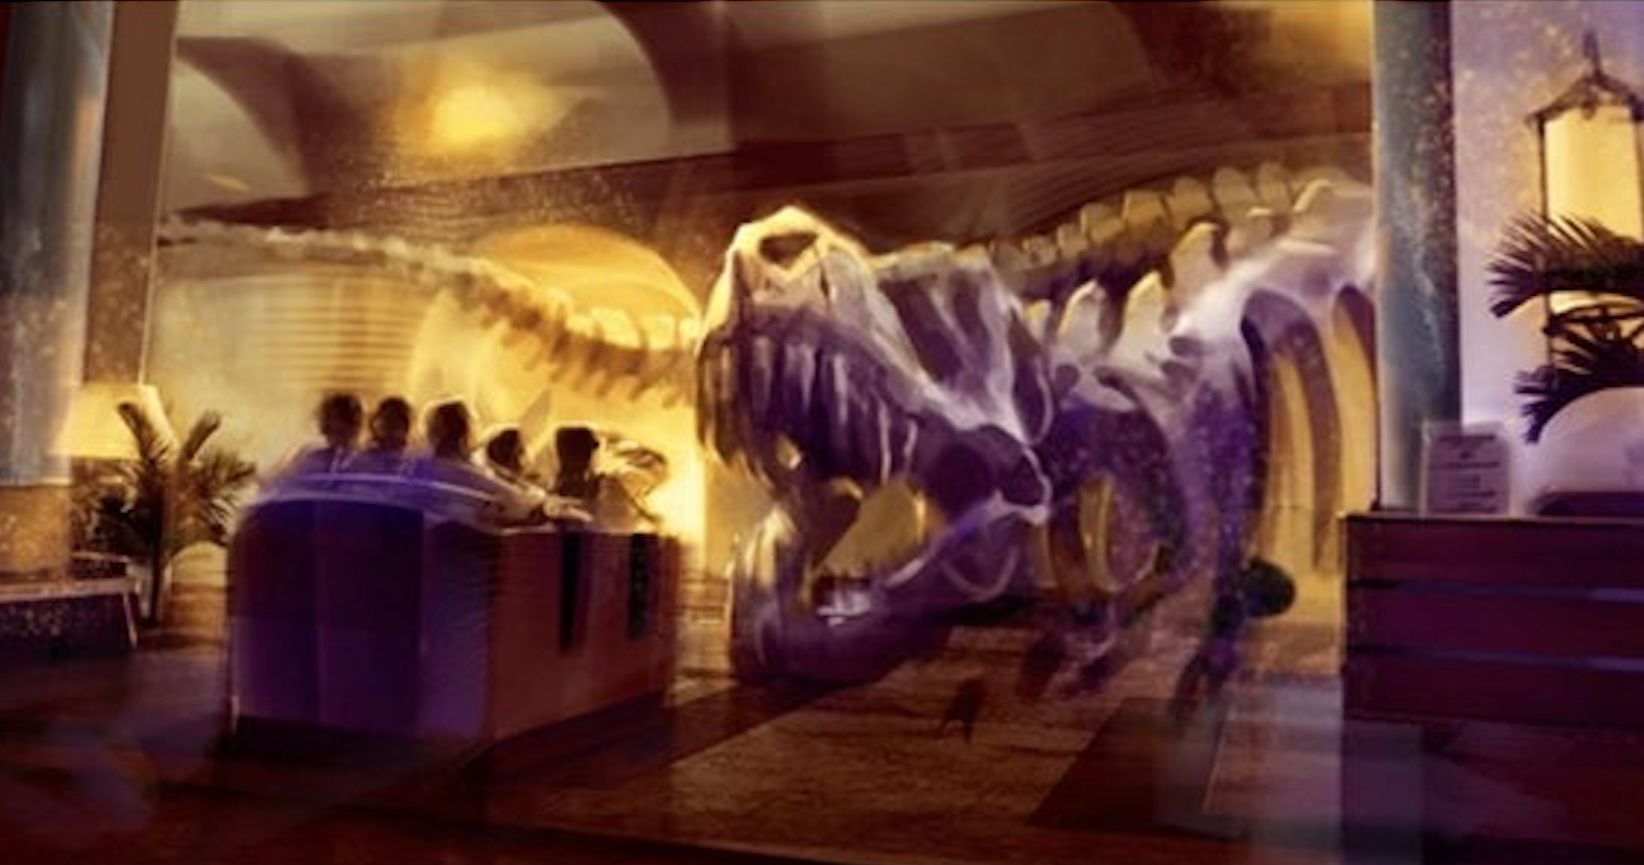 Night at the Museum Ride Concept Art Reveals Abandoned Theme Park Attraction